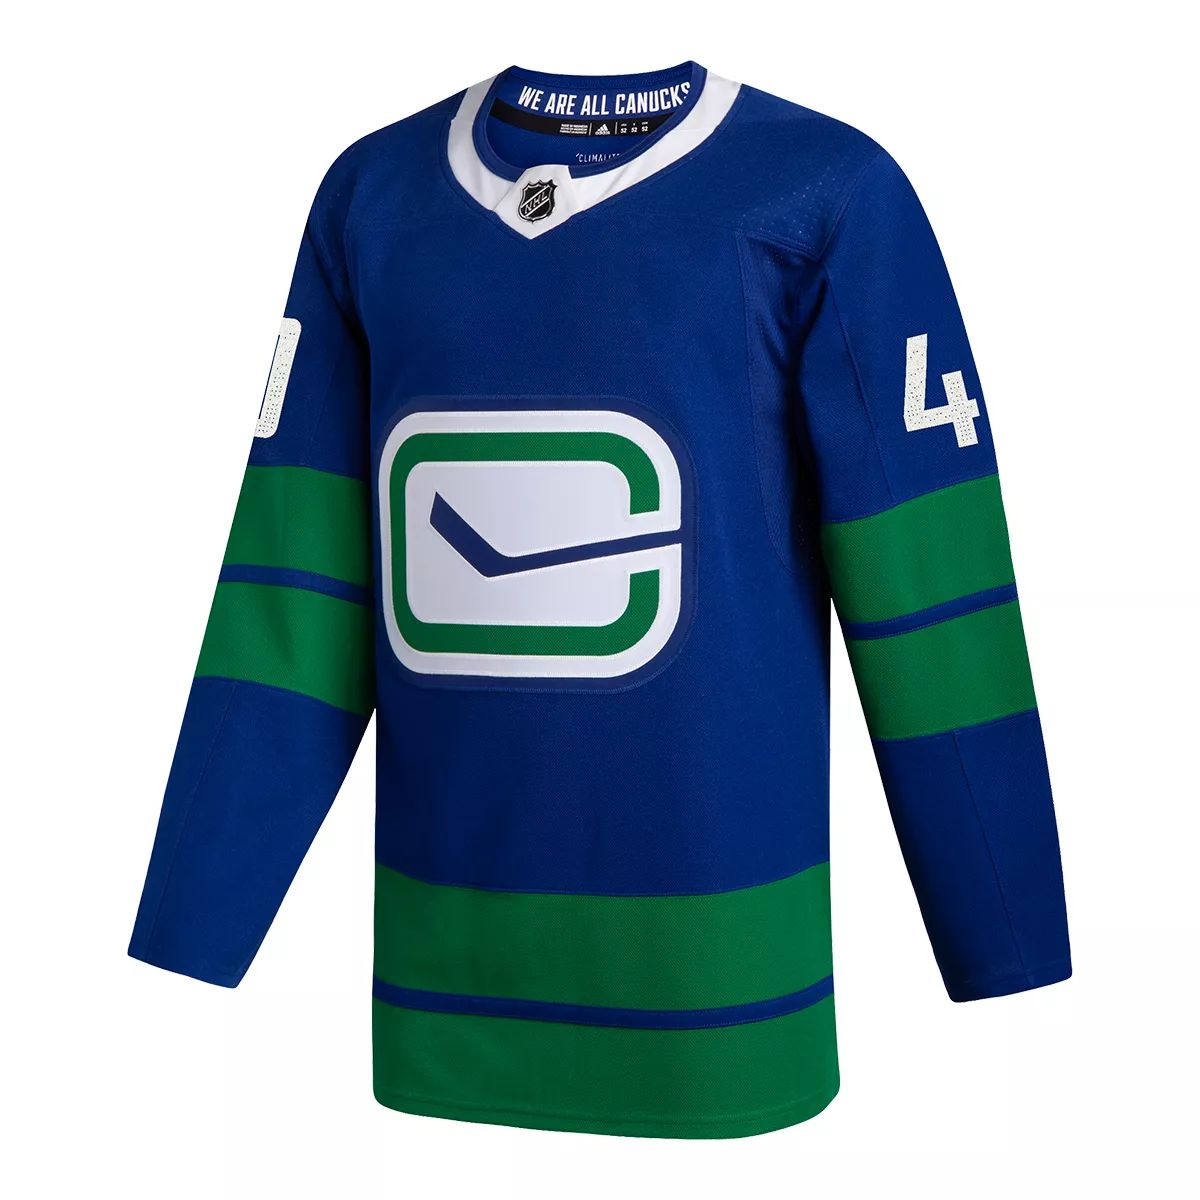 NWT Adidas Vancouver Canucks Elias Pettersson Authentic Pro Hockey